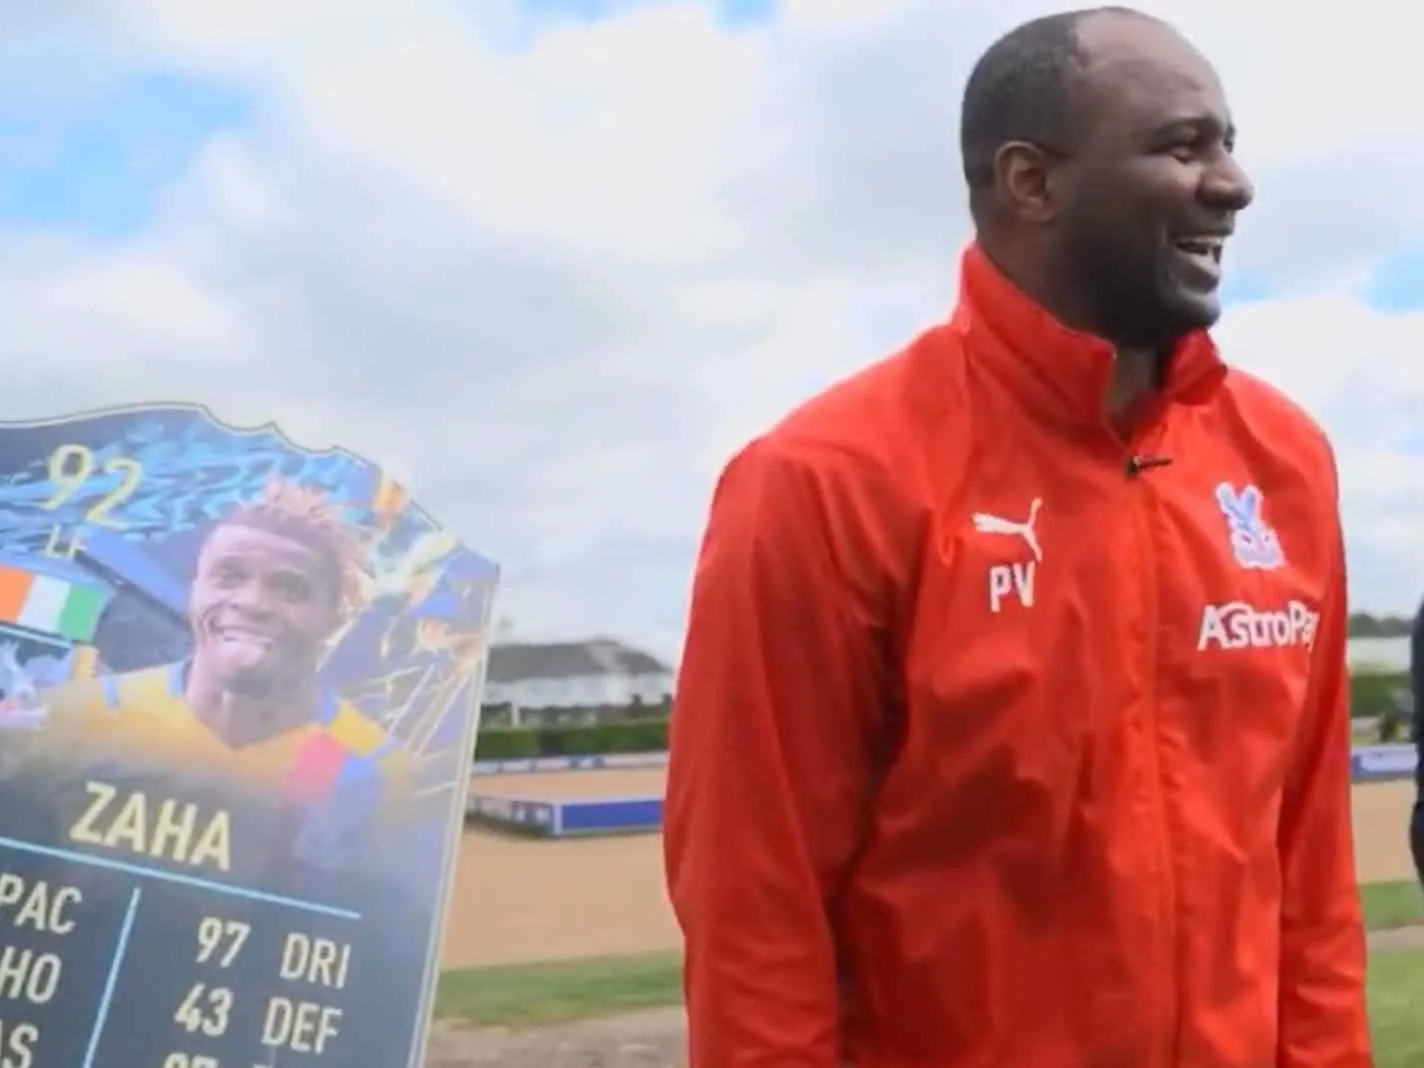 The photo shows Patrick Vieira laughing when WIlfried Zaha says that even Vieira wouldn’t have been able to live with me.